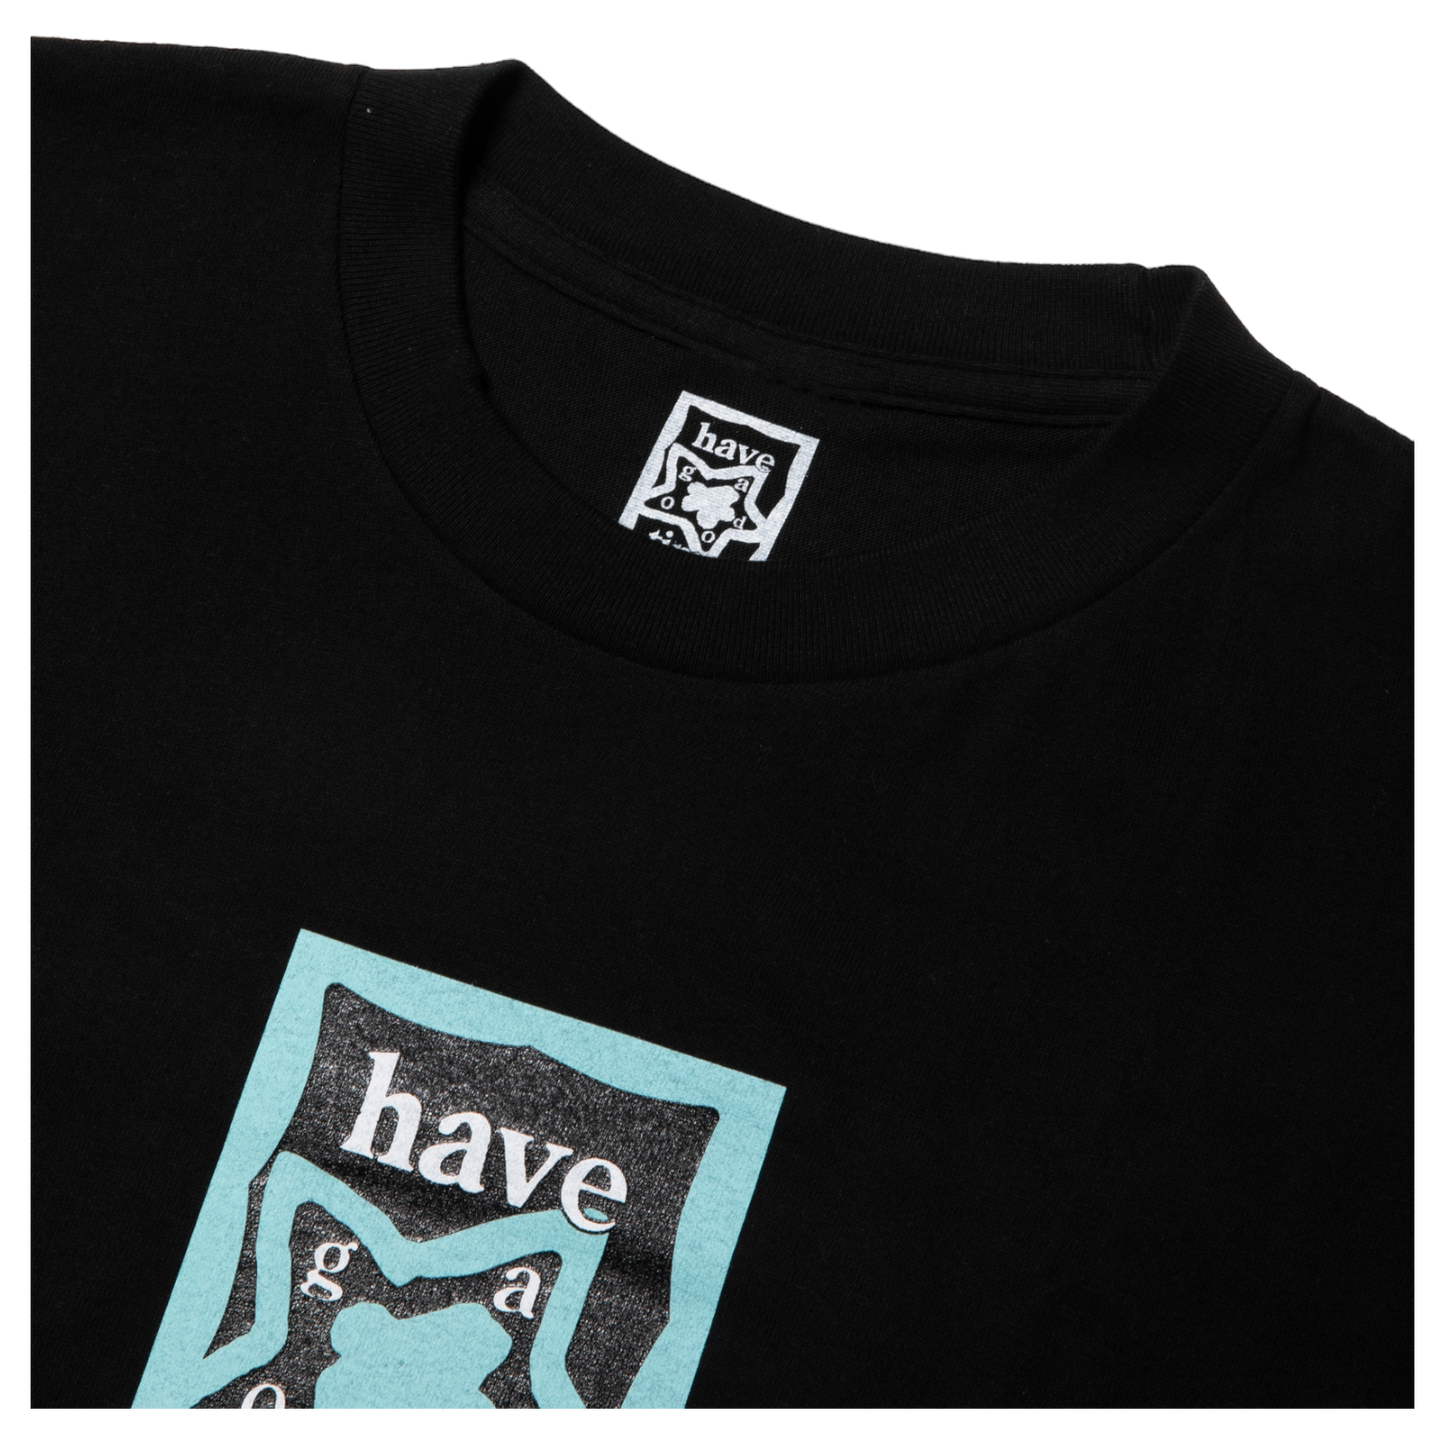 have a good time frame tee black